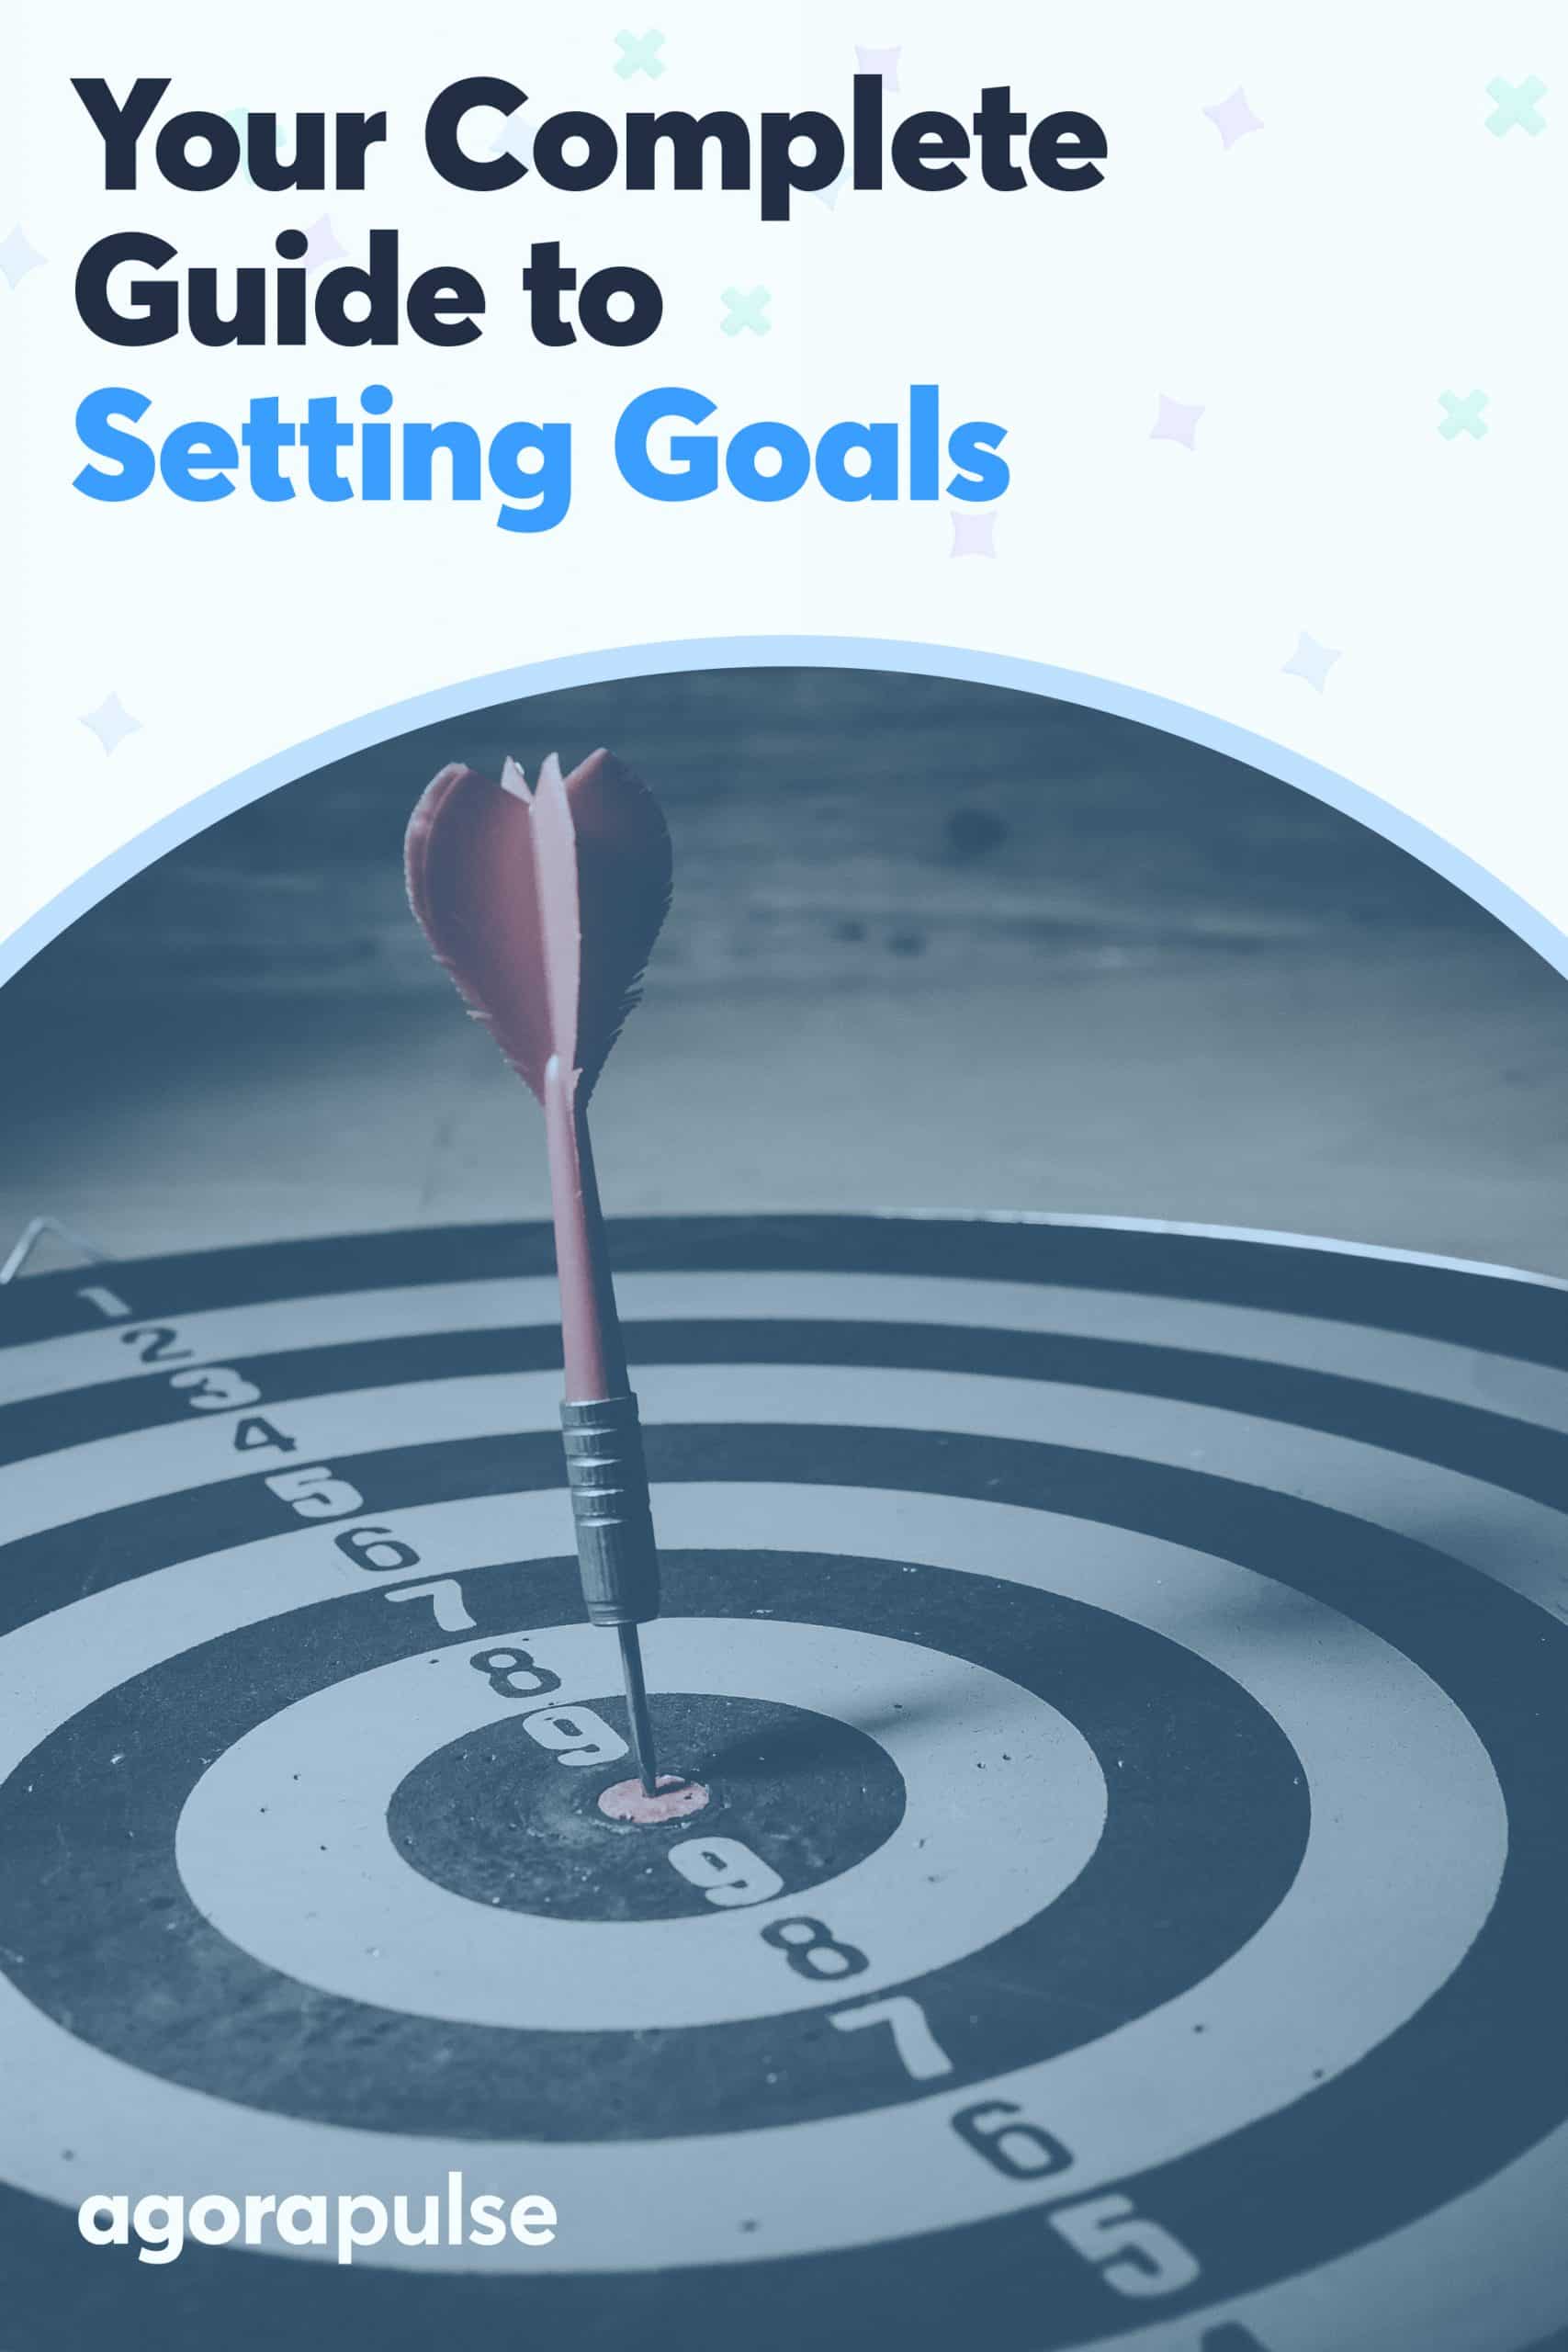 Goal Setting in 2023: How to Really Achieve Your Desired Outcomes [Free Ebook]